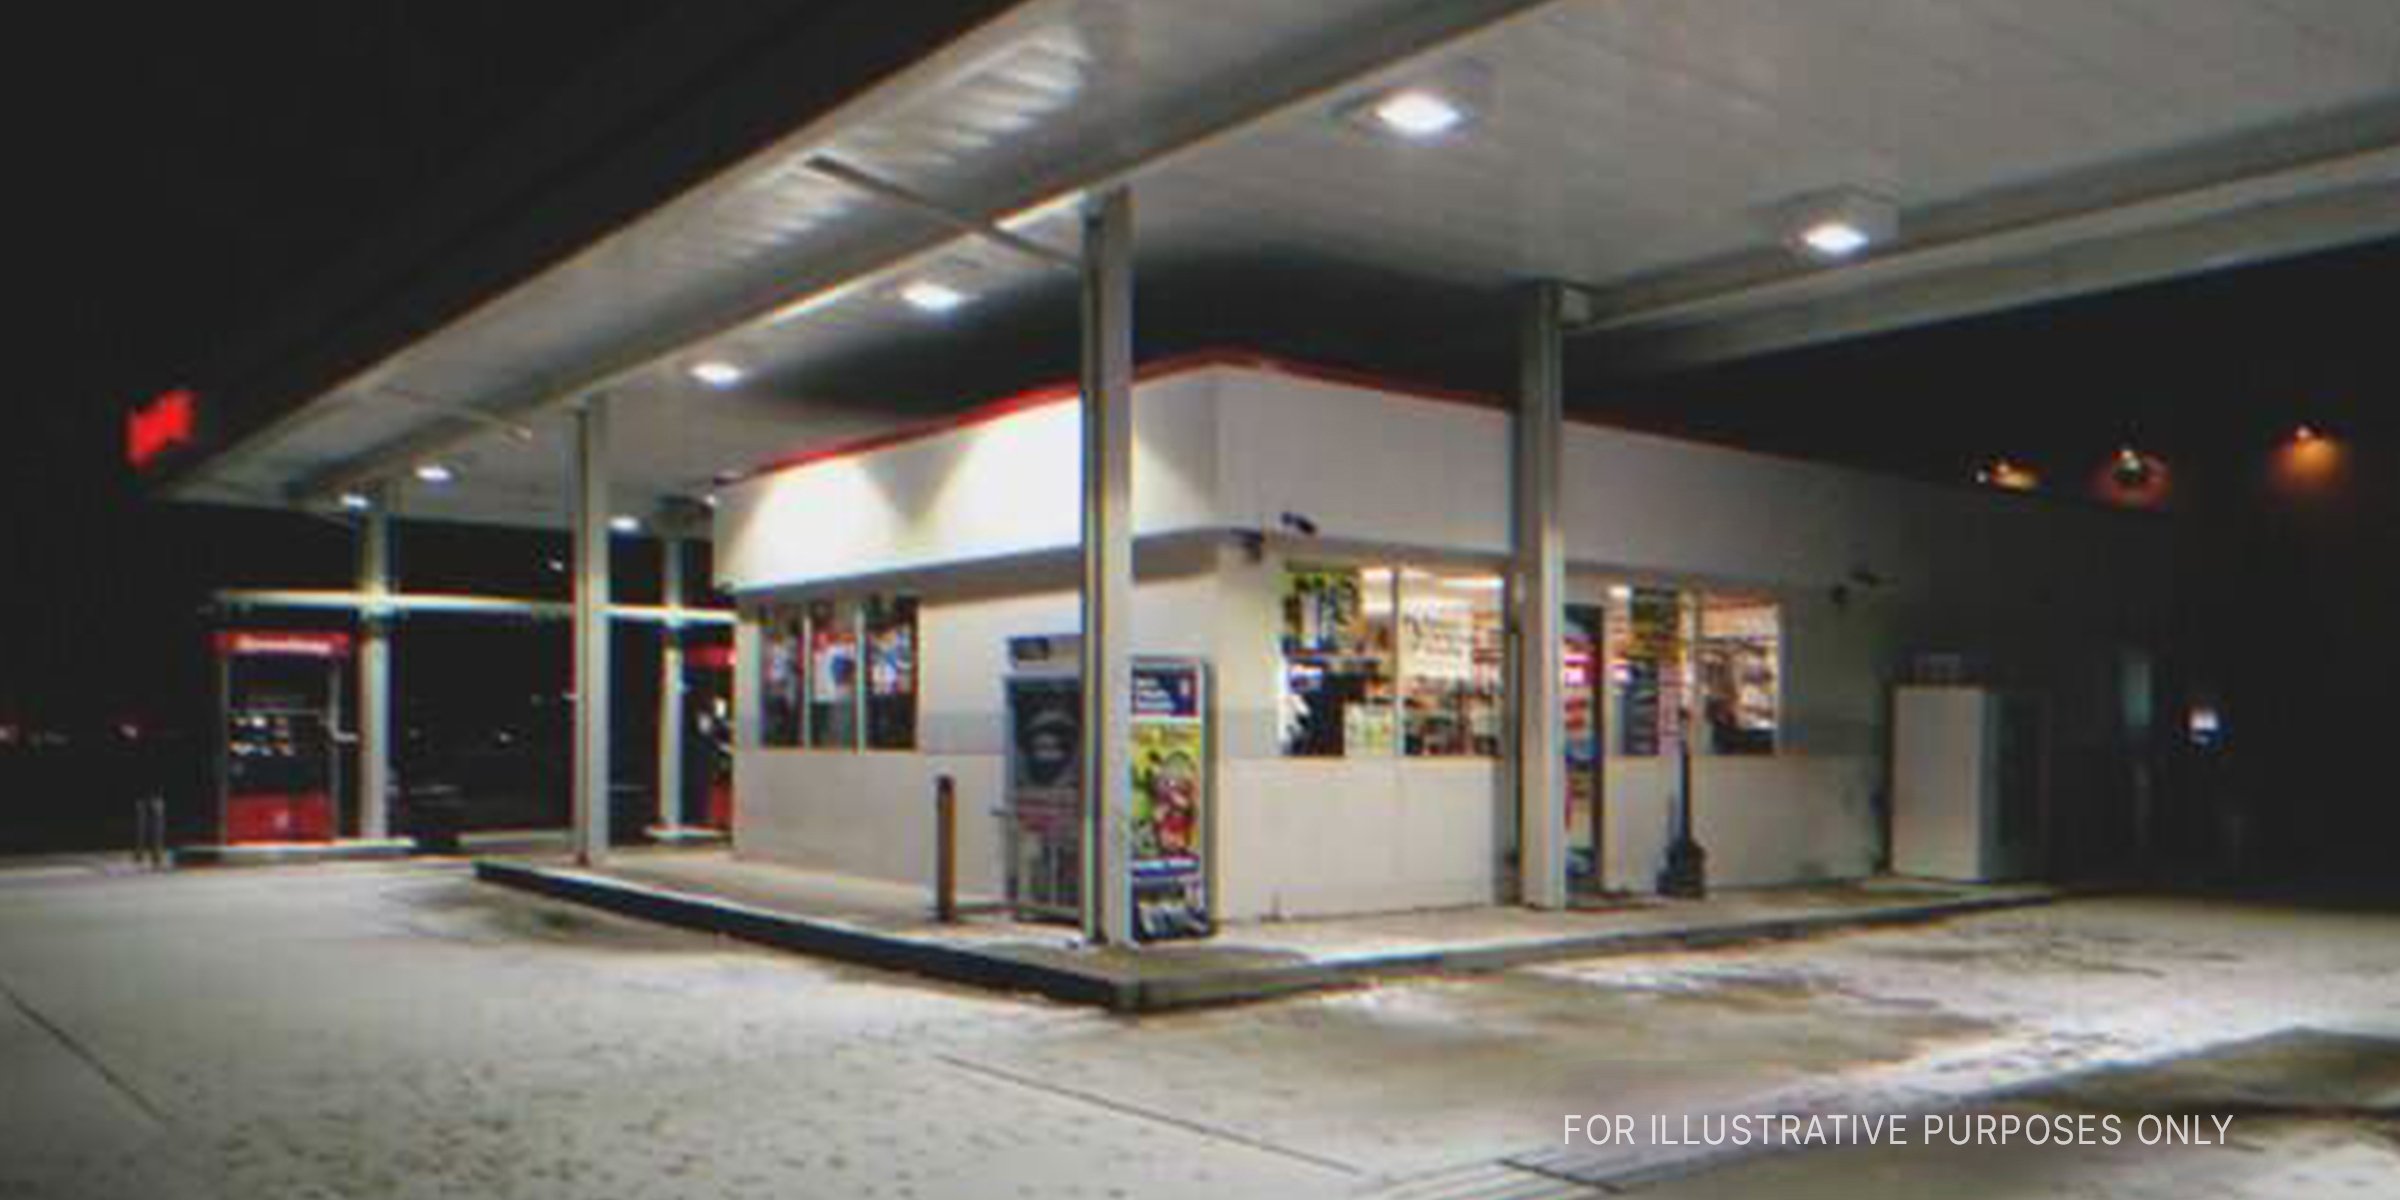 Gas station at night. | Source: Flickr / zebMcCorkle (CC BY-SA 2.0)